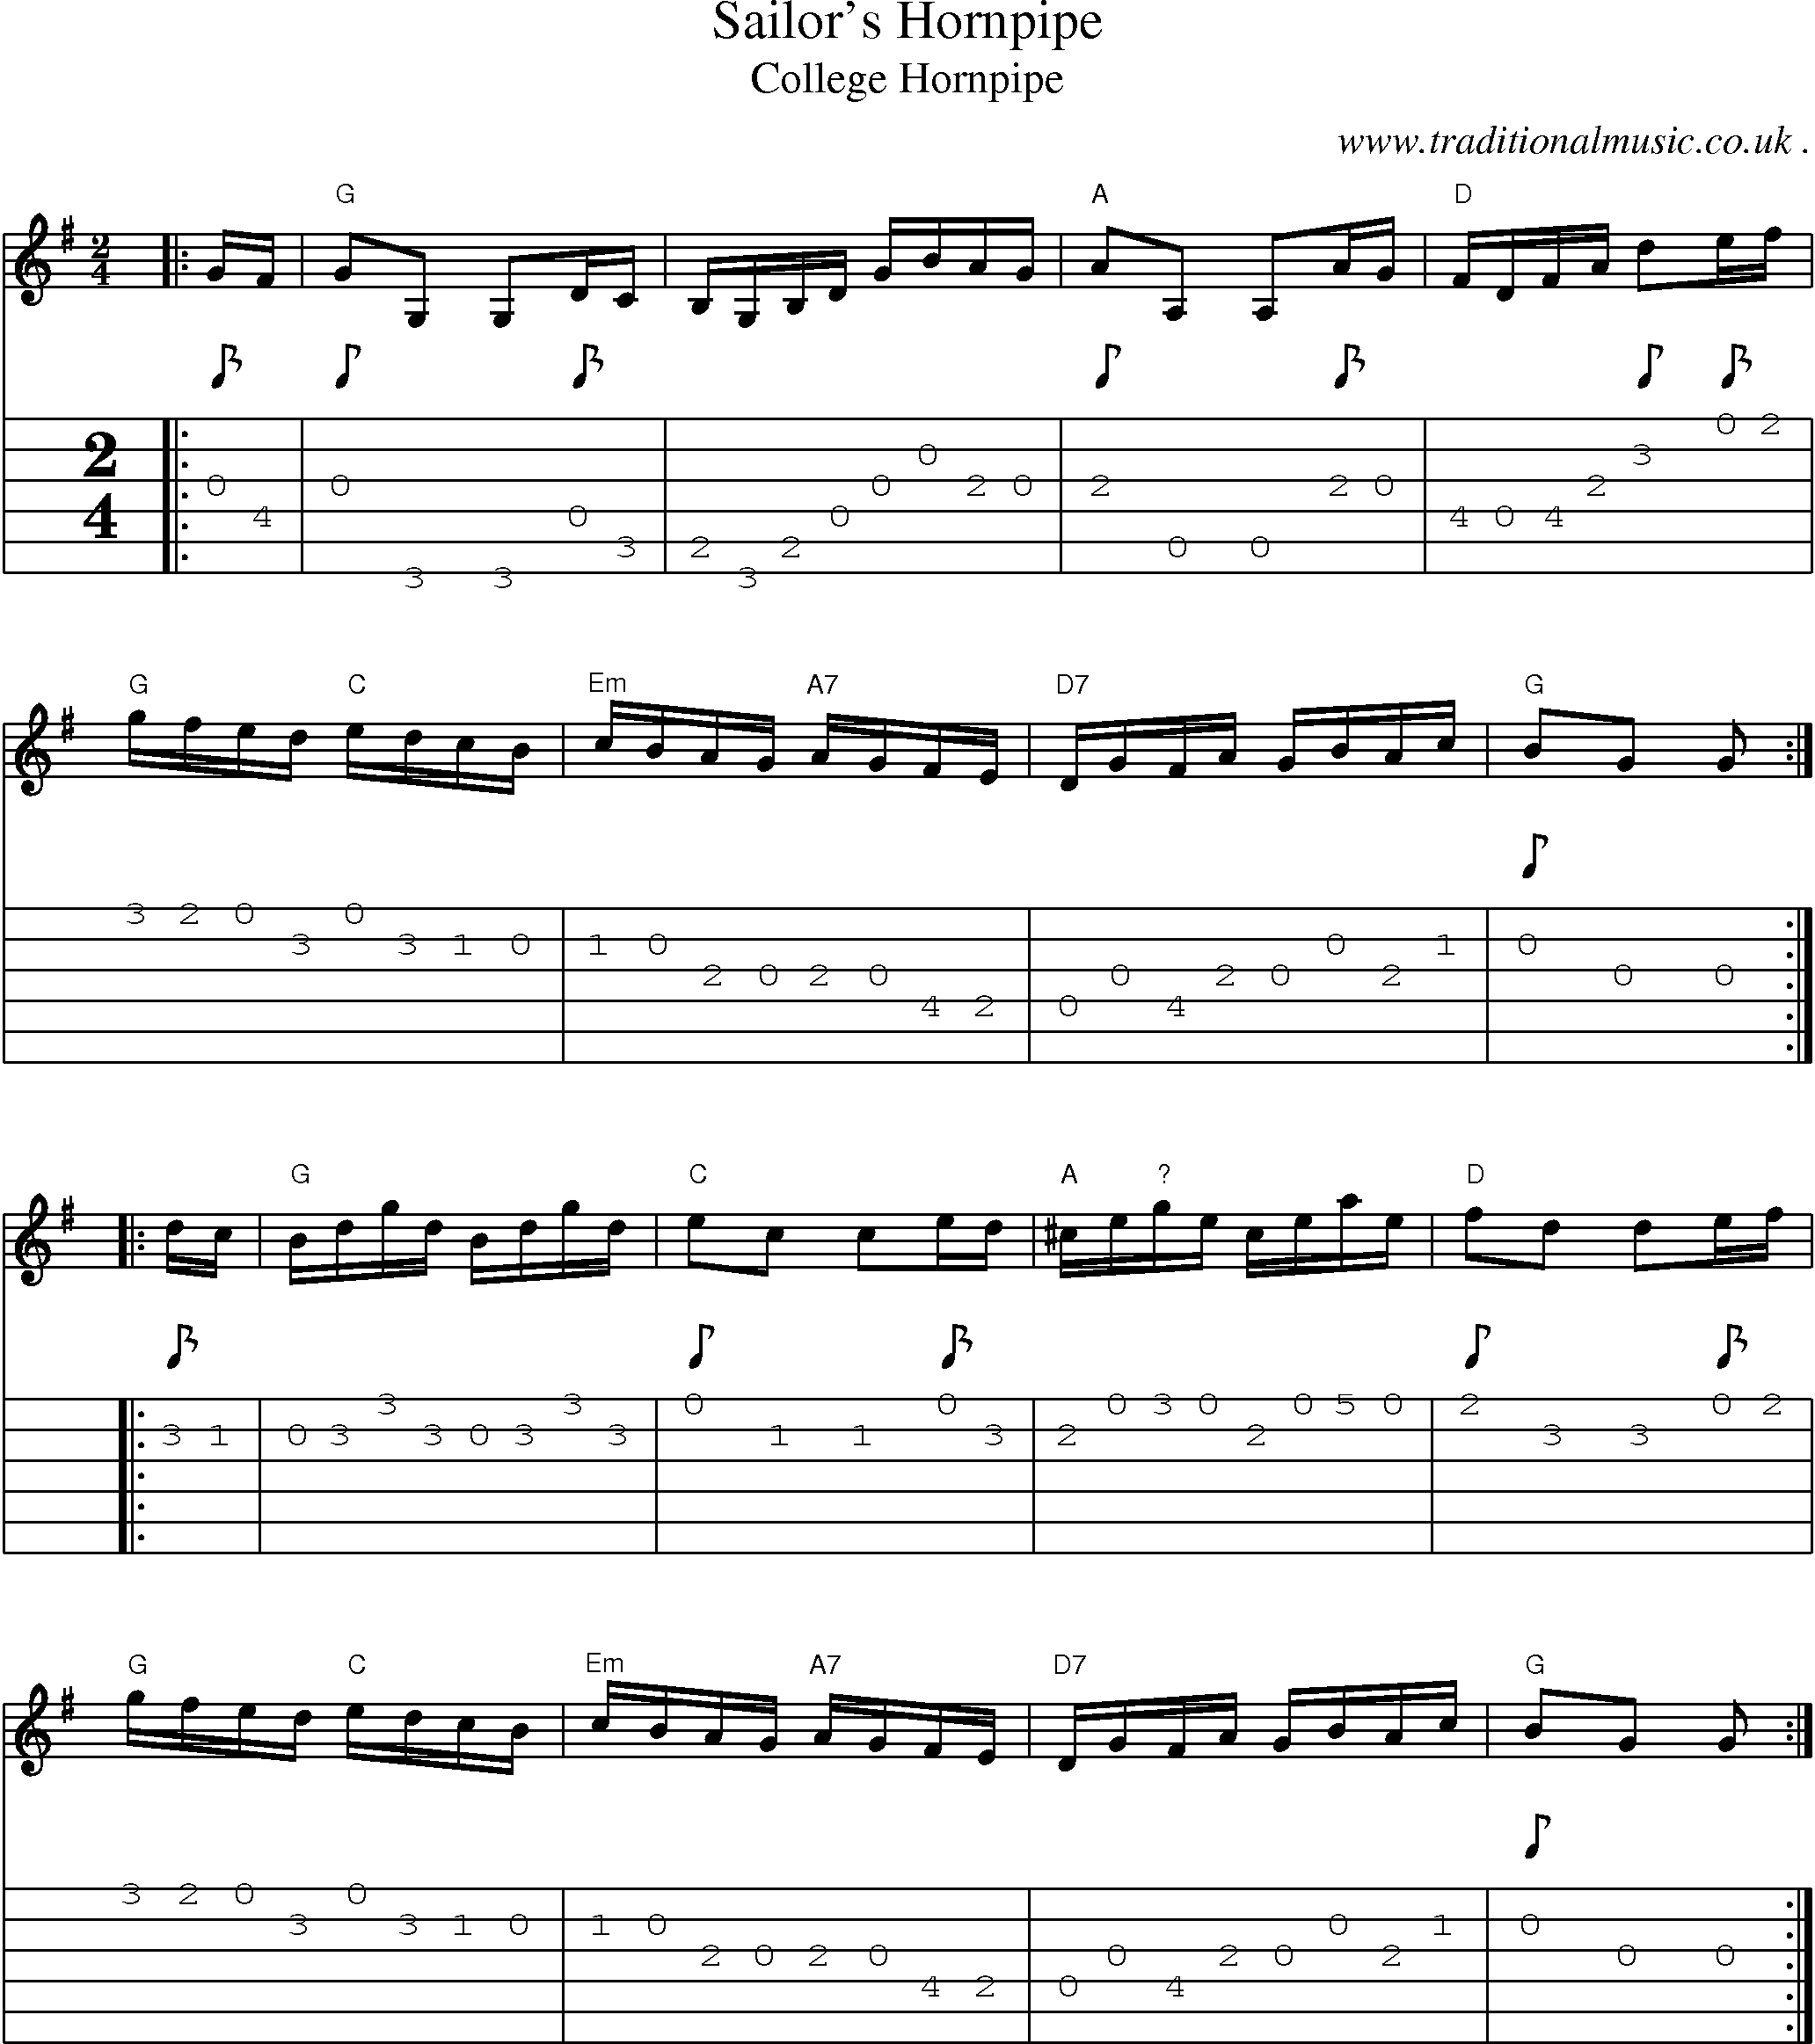 Music Score and Guitar Tabs for Sailors Hornpipe